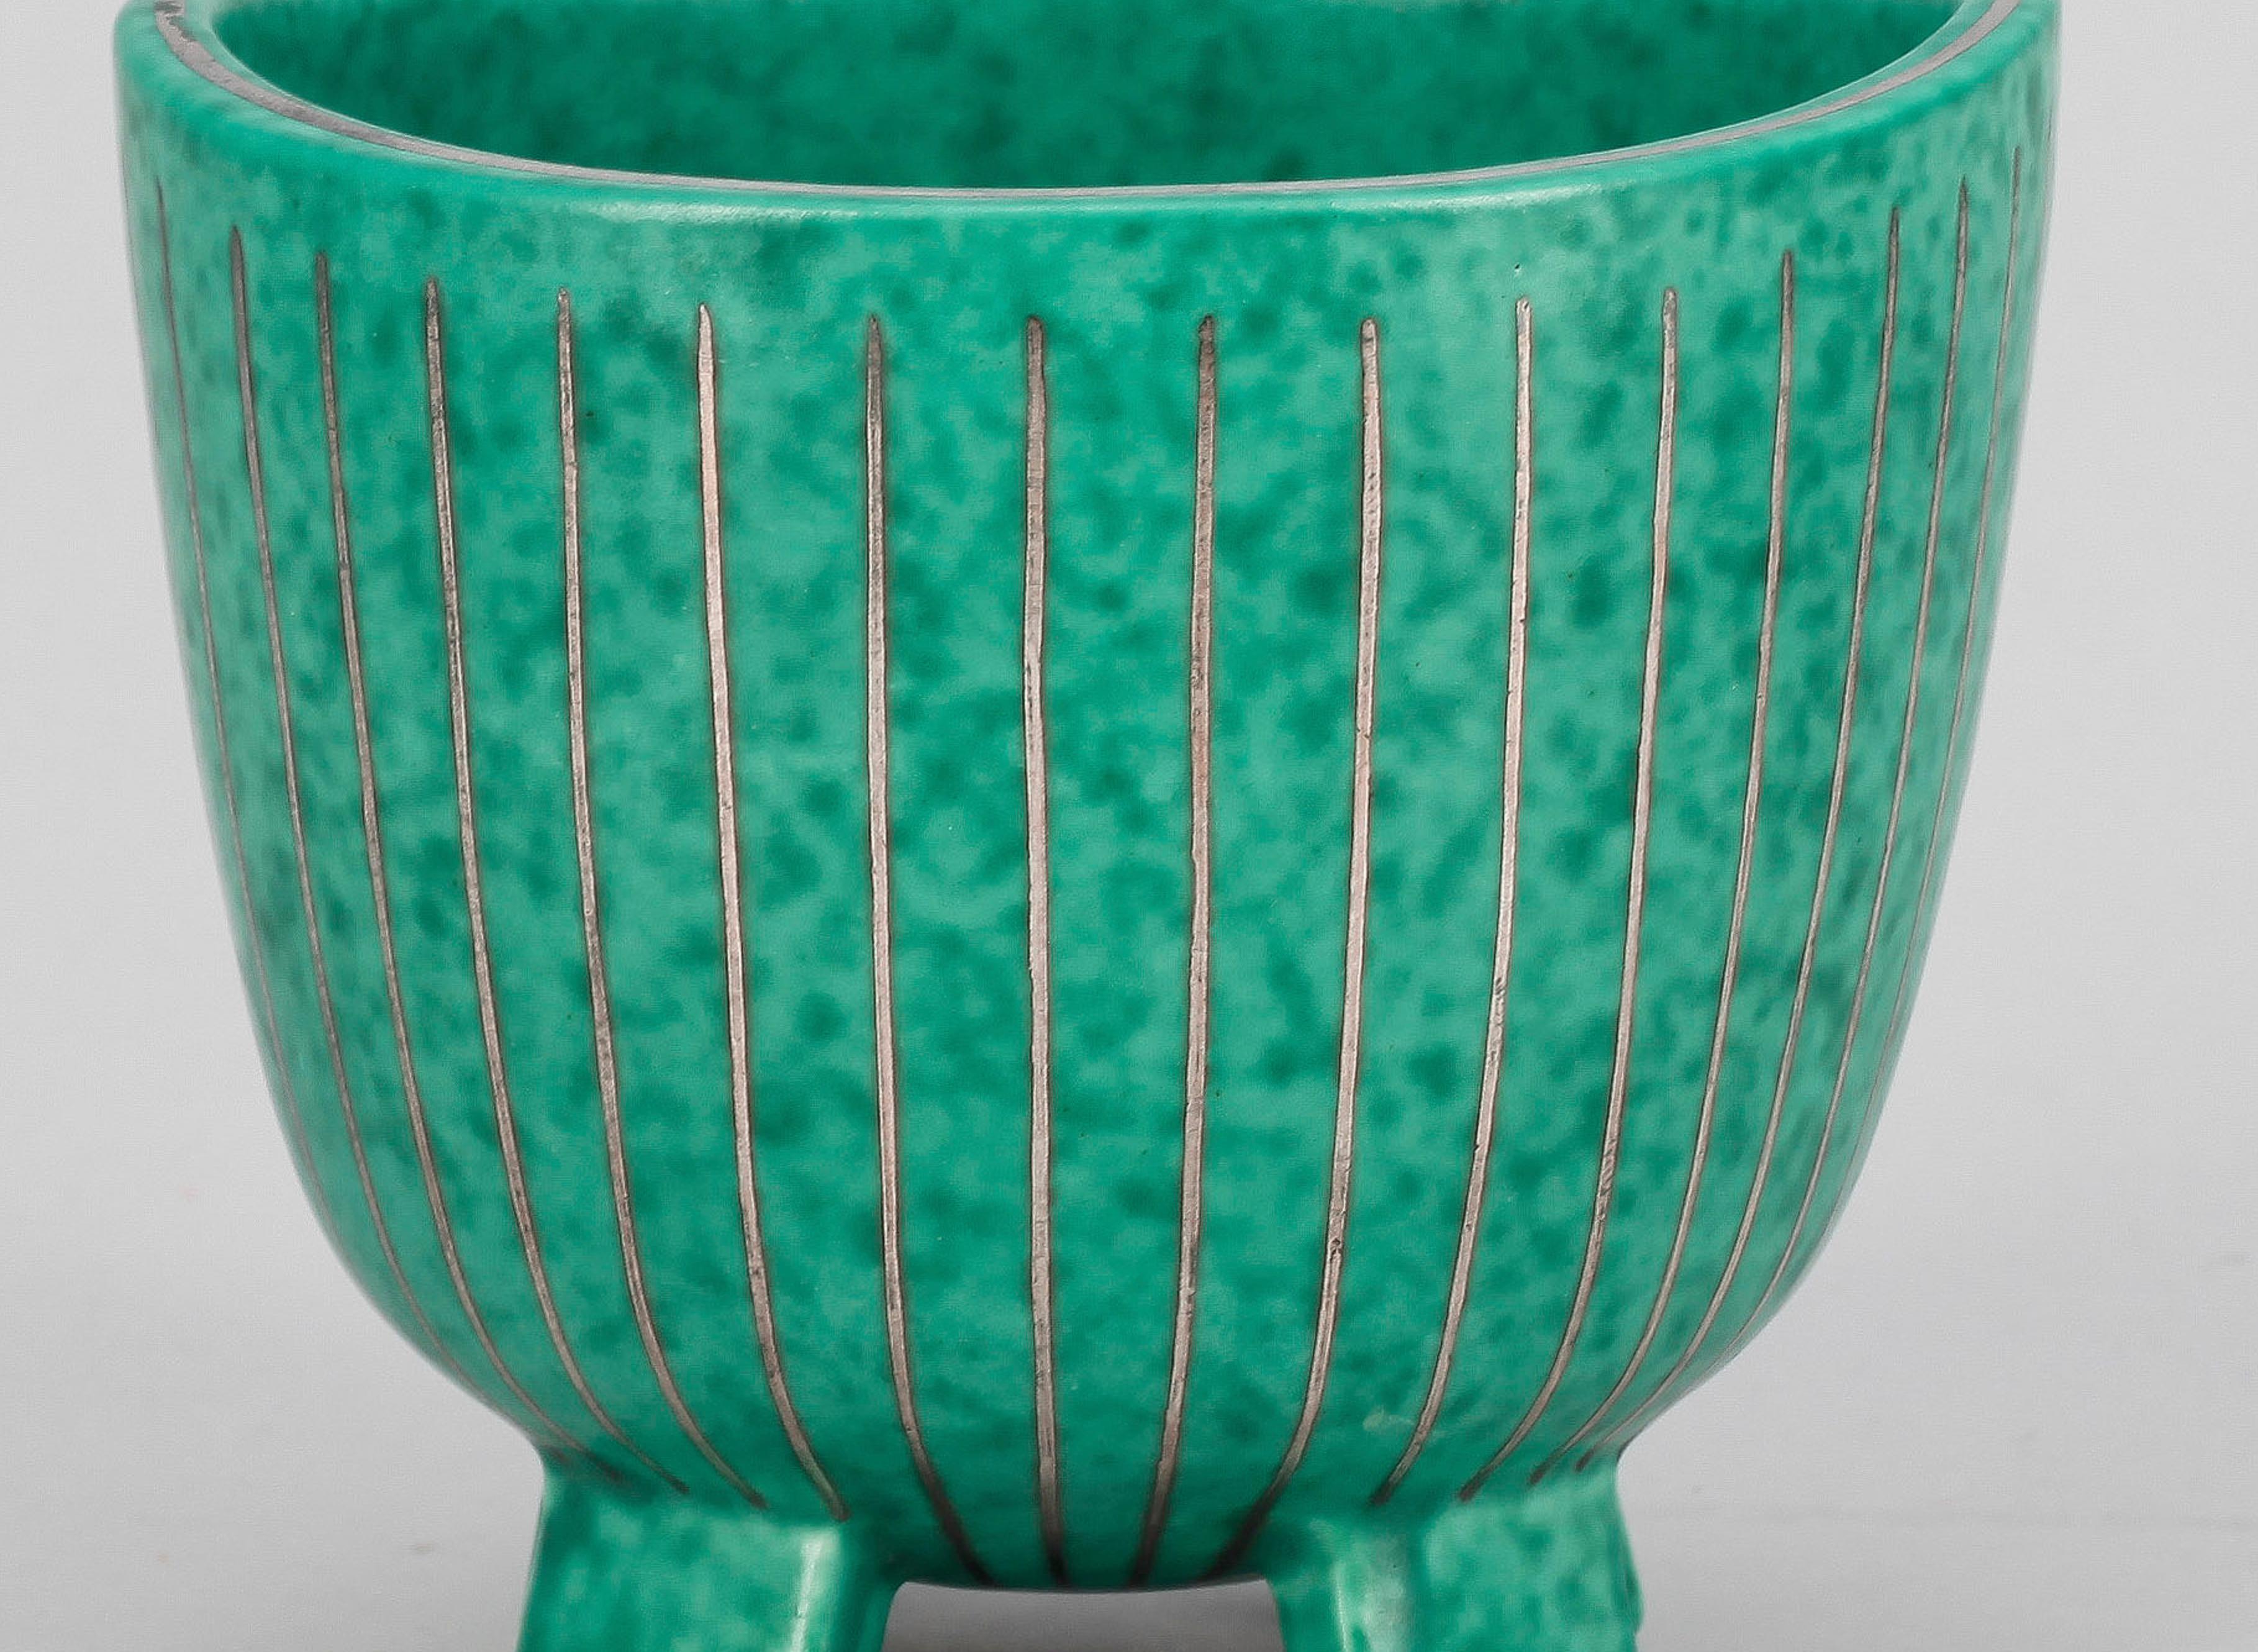 A pot in ceramic with hand made silver inlay from the 1940s Argenta collection made by Wilhelm Kåge for Gustavsberg, signature underneath.
 The now iconic argenta stoneware collection, with its green glaze and silver decoration, is one of wilhelm